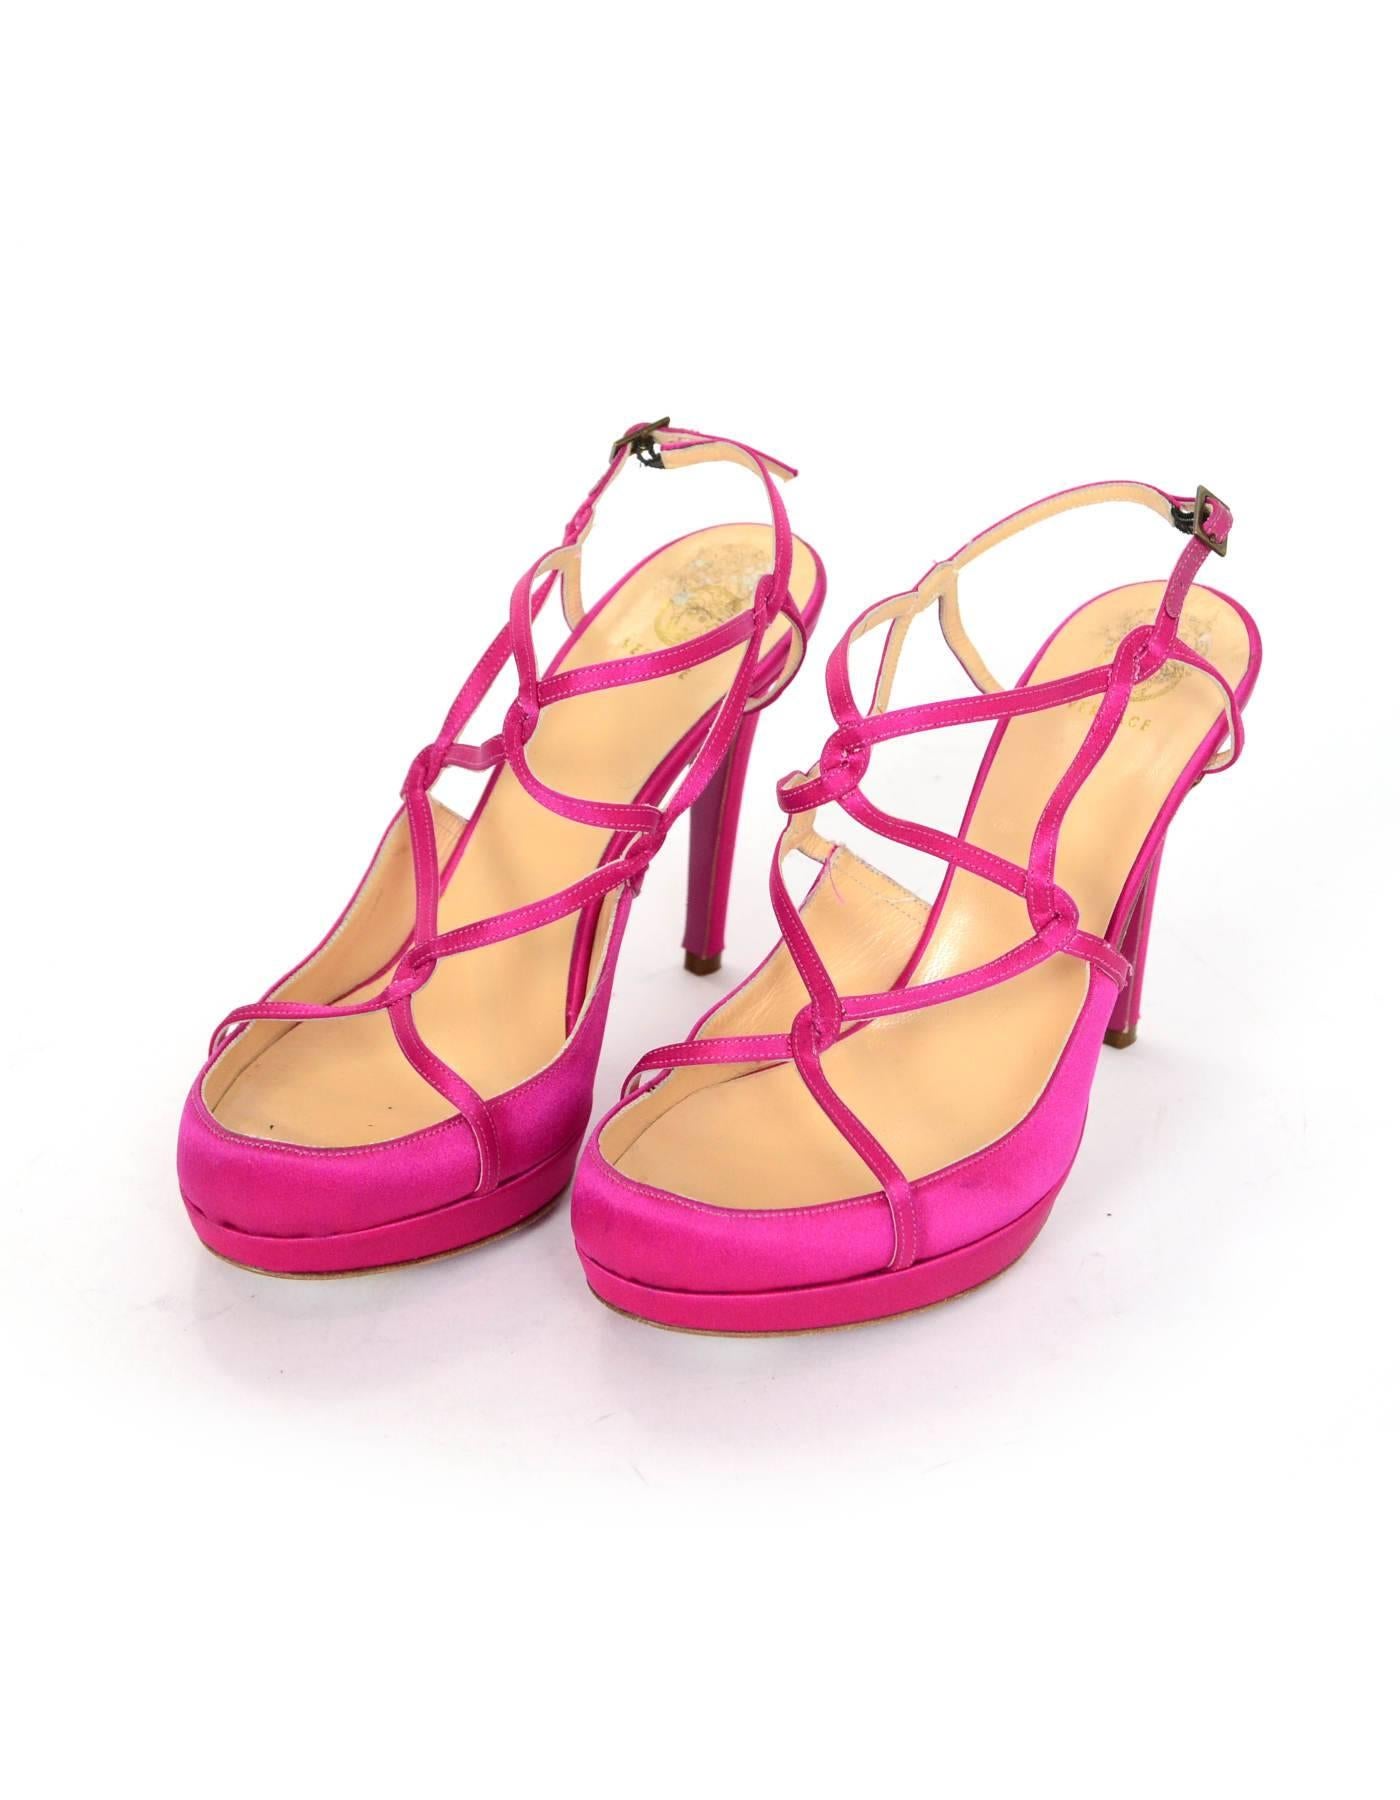 Versace Pink Satin Strappy Sandals Sz 37

Made In: Italy
Color: Pink
Materials: Satin
Closure/Opening: Buckle closure at ankle
Sole Stamp: Vero cuoio made in Italy 37
Overall Condition: Very good pre-owned condition wth the exception of some wear at